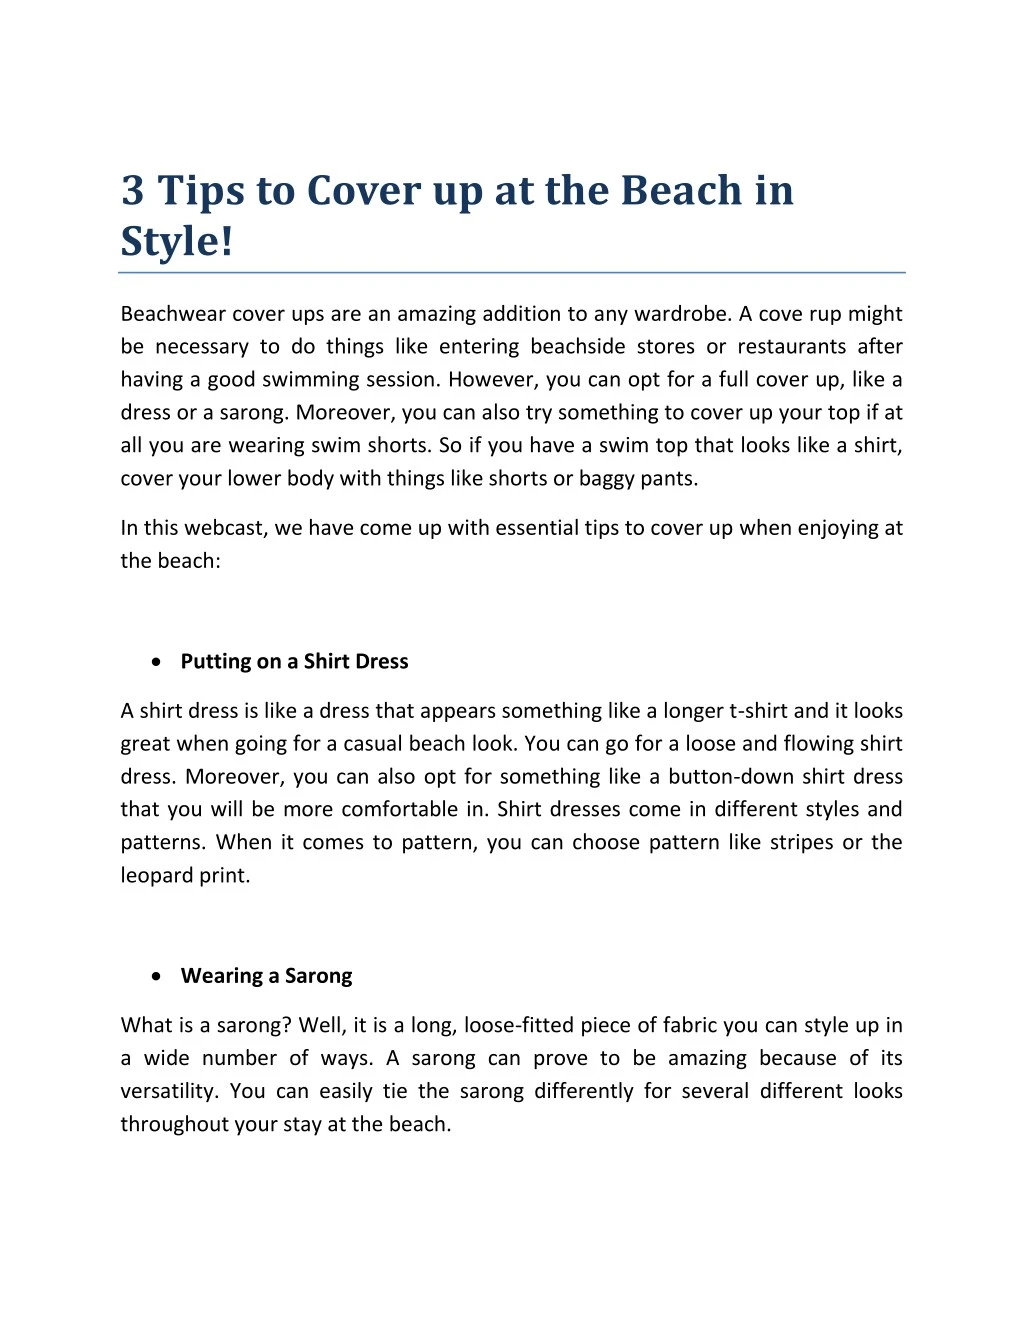 3 tips to cover up at the beach in style